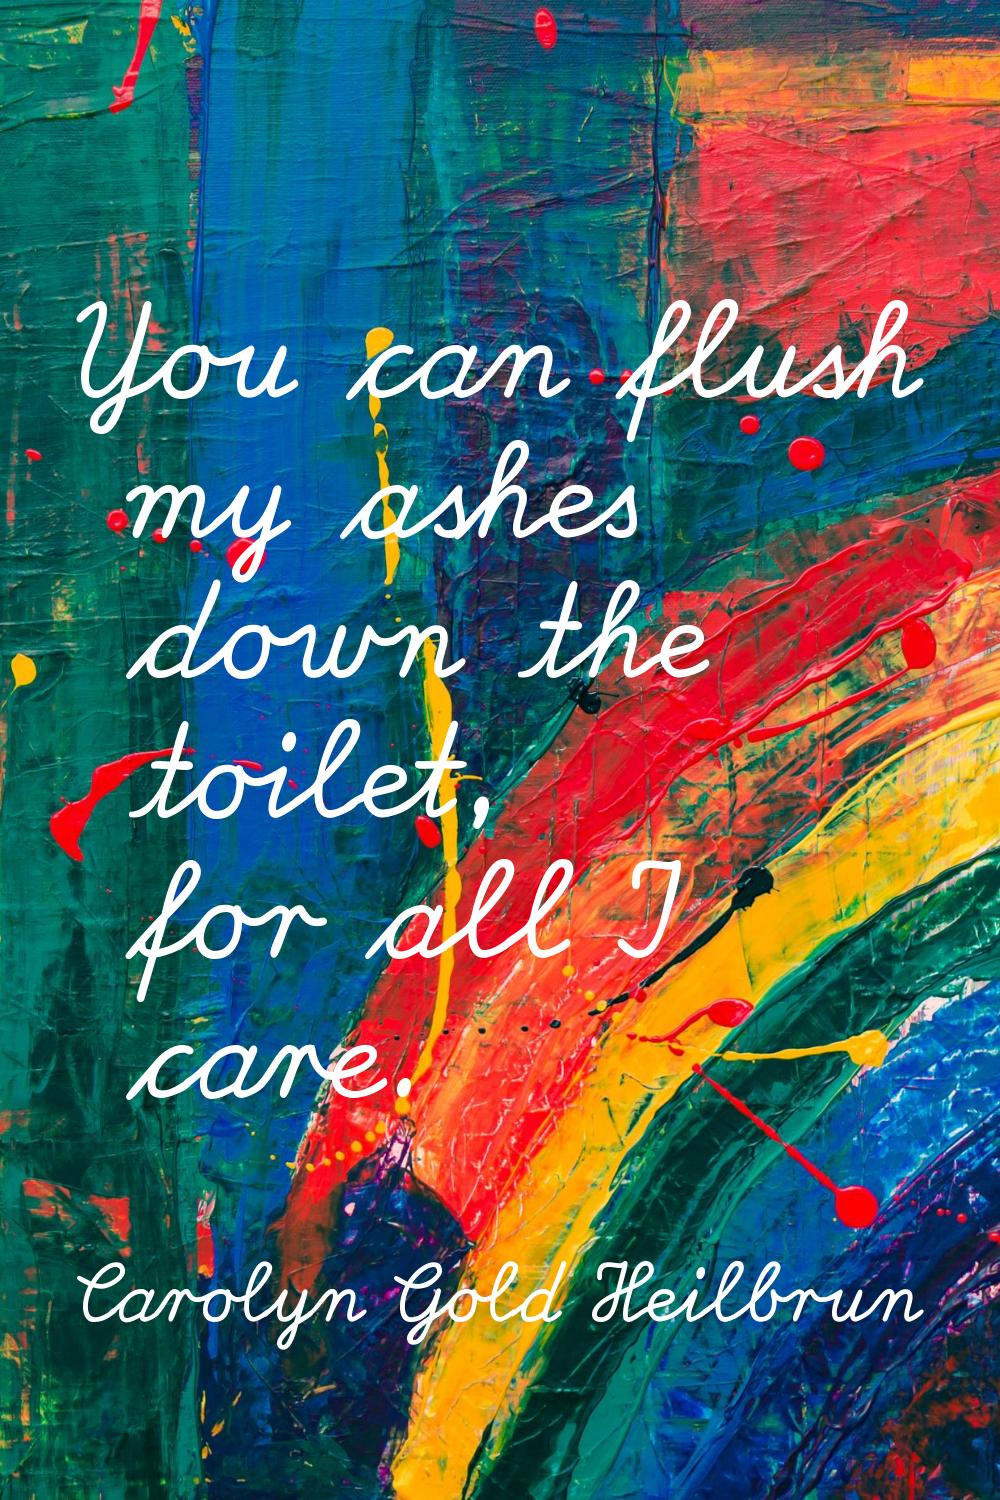 You can flush my ashes down the toilet, for all I care.